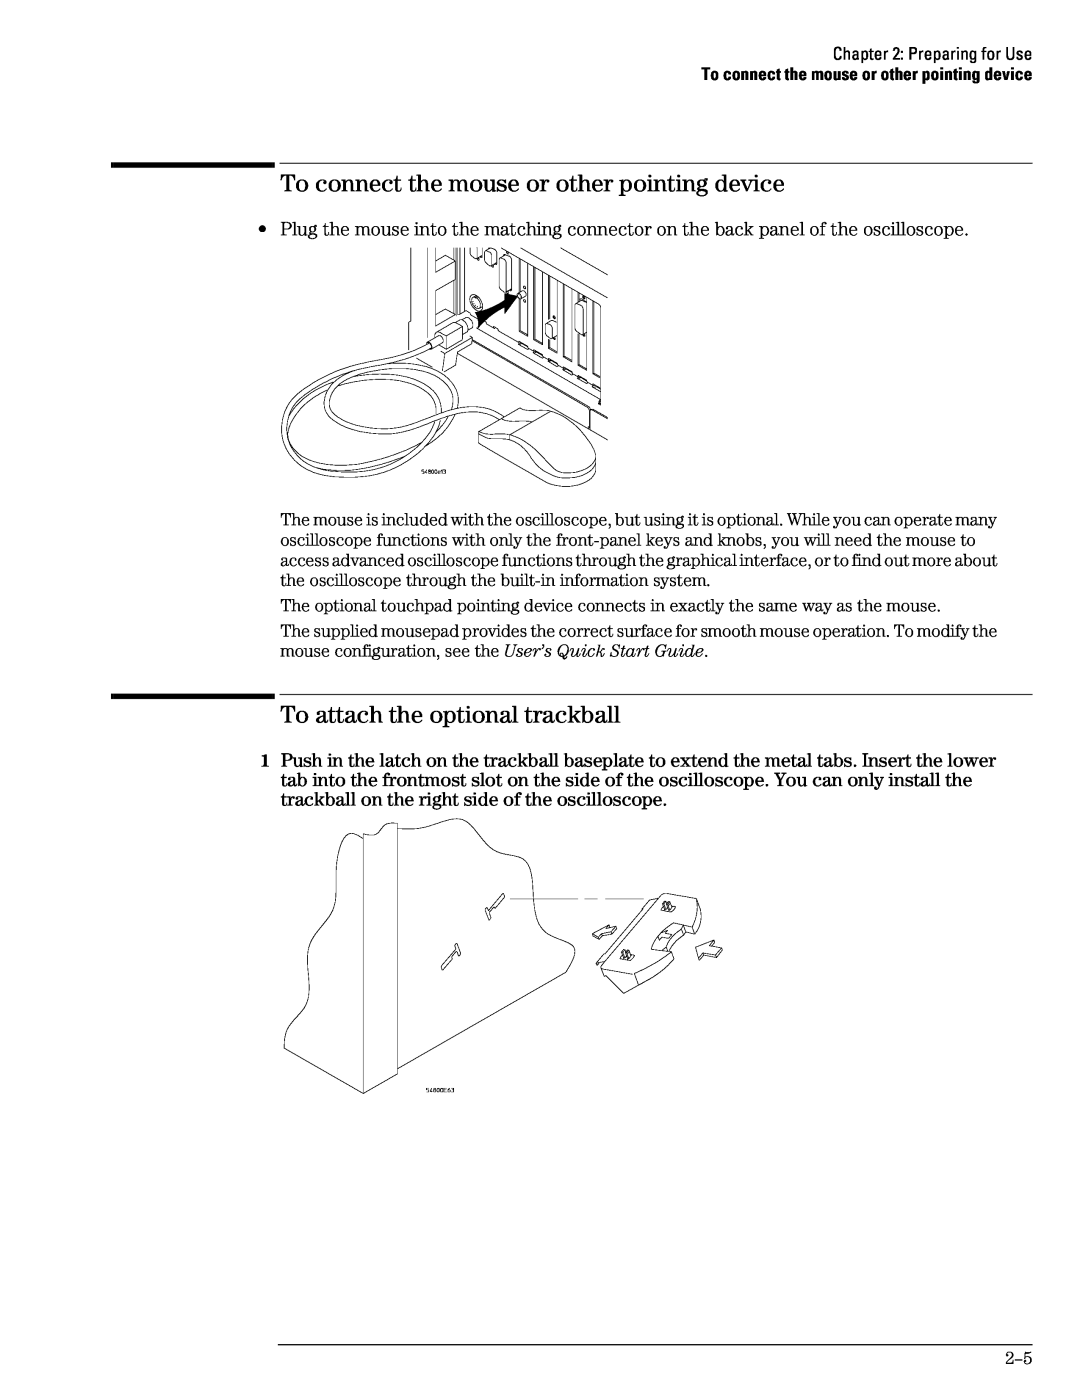 Agilent Technologies 46A, 45A, 54835A manual To connect the mouse or other pointing device, To attach the optional trackball 